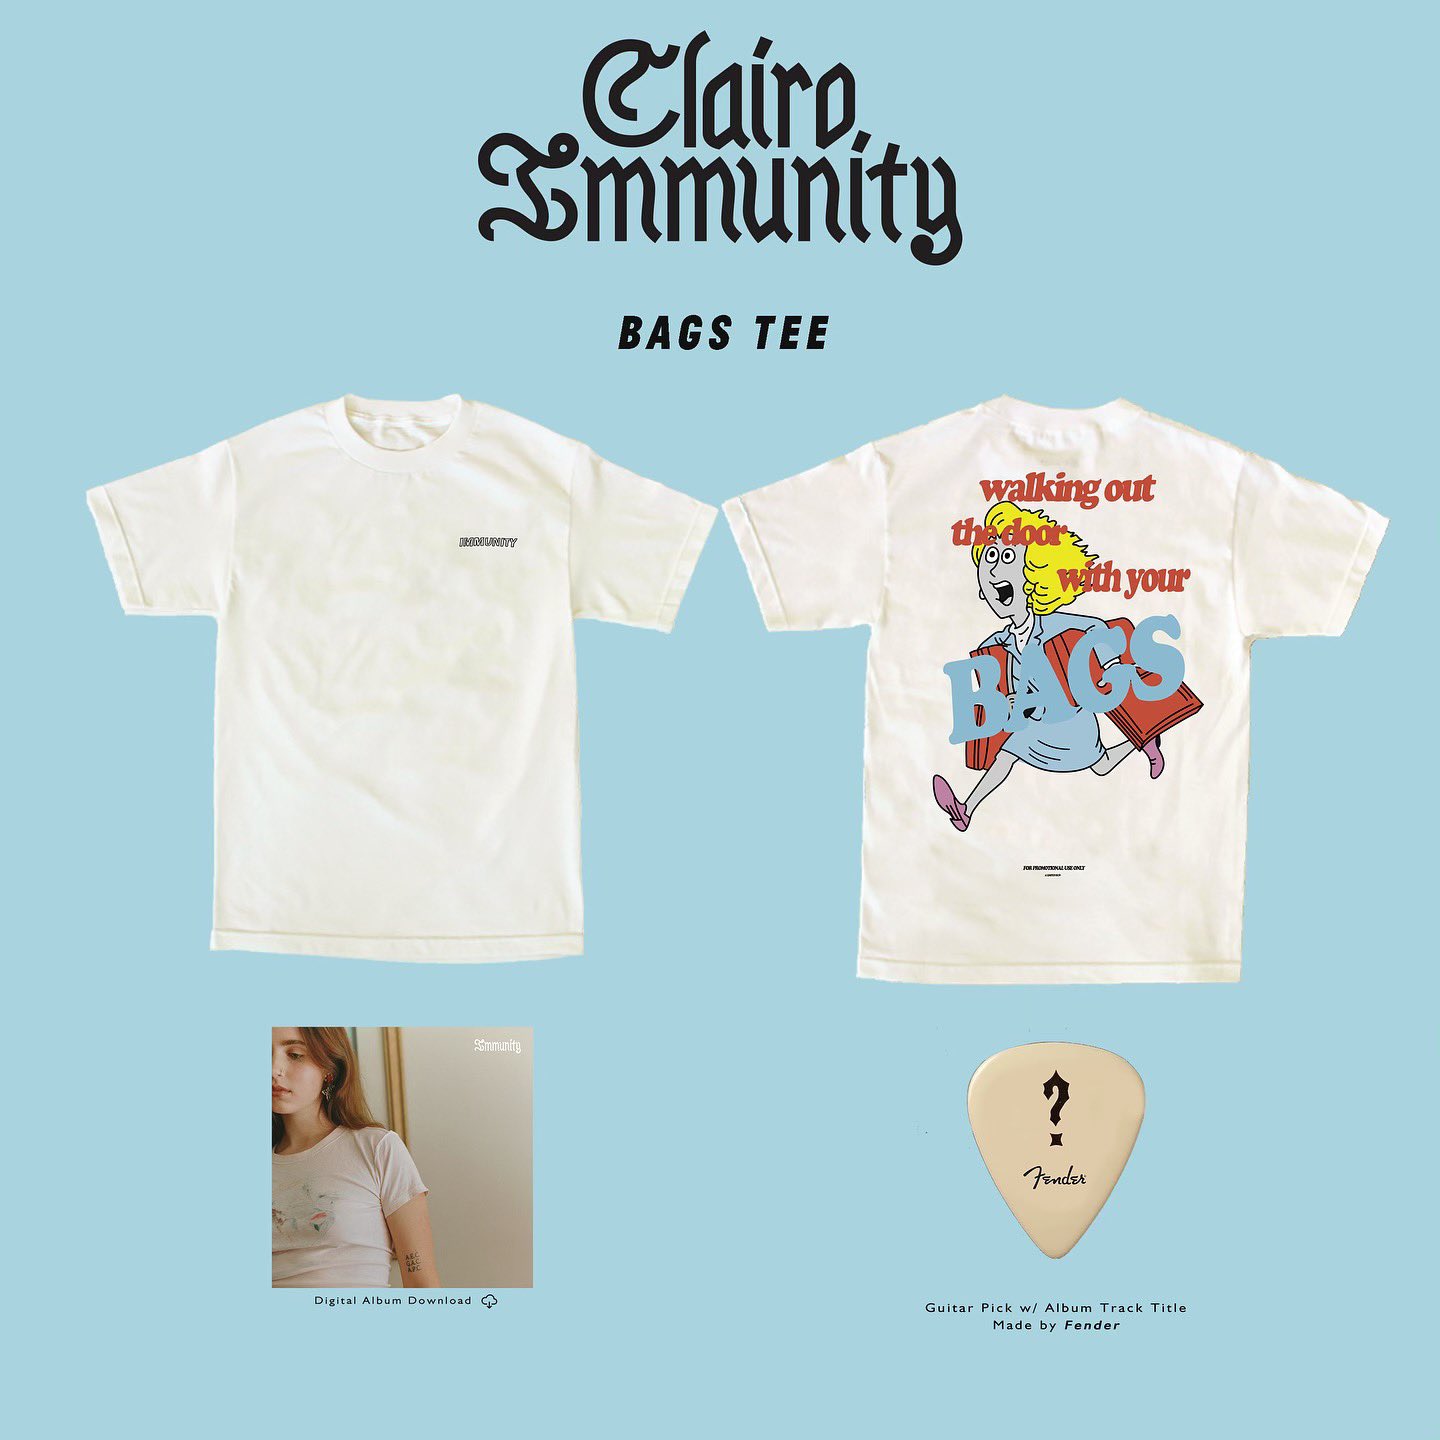 claire cottrill en Twitter: "bags/immunity merch now available on  https://t.co/5xJHntIFOL, couple of bundles feat the digital download of the  album on August 2nd, t shirt, and 2 guitar picks. the guitar picks